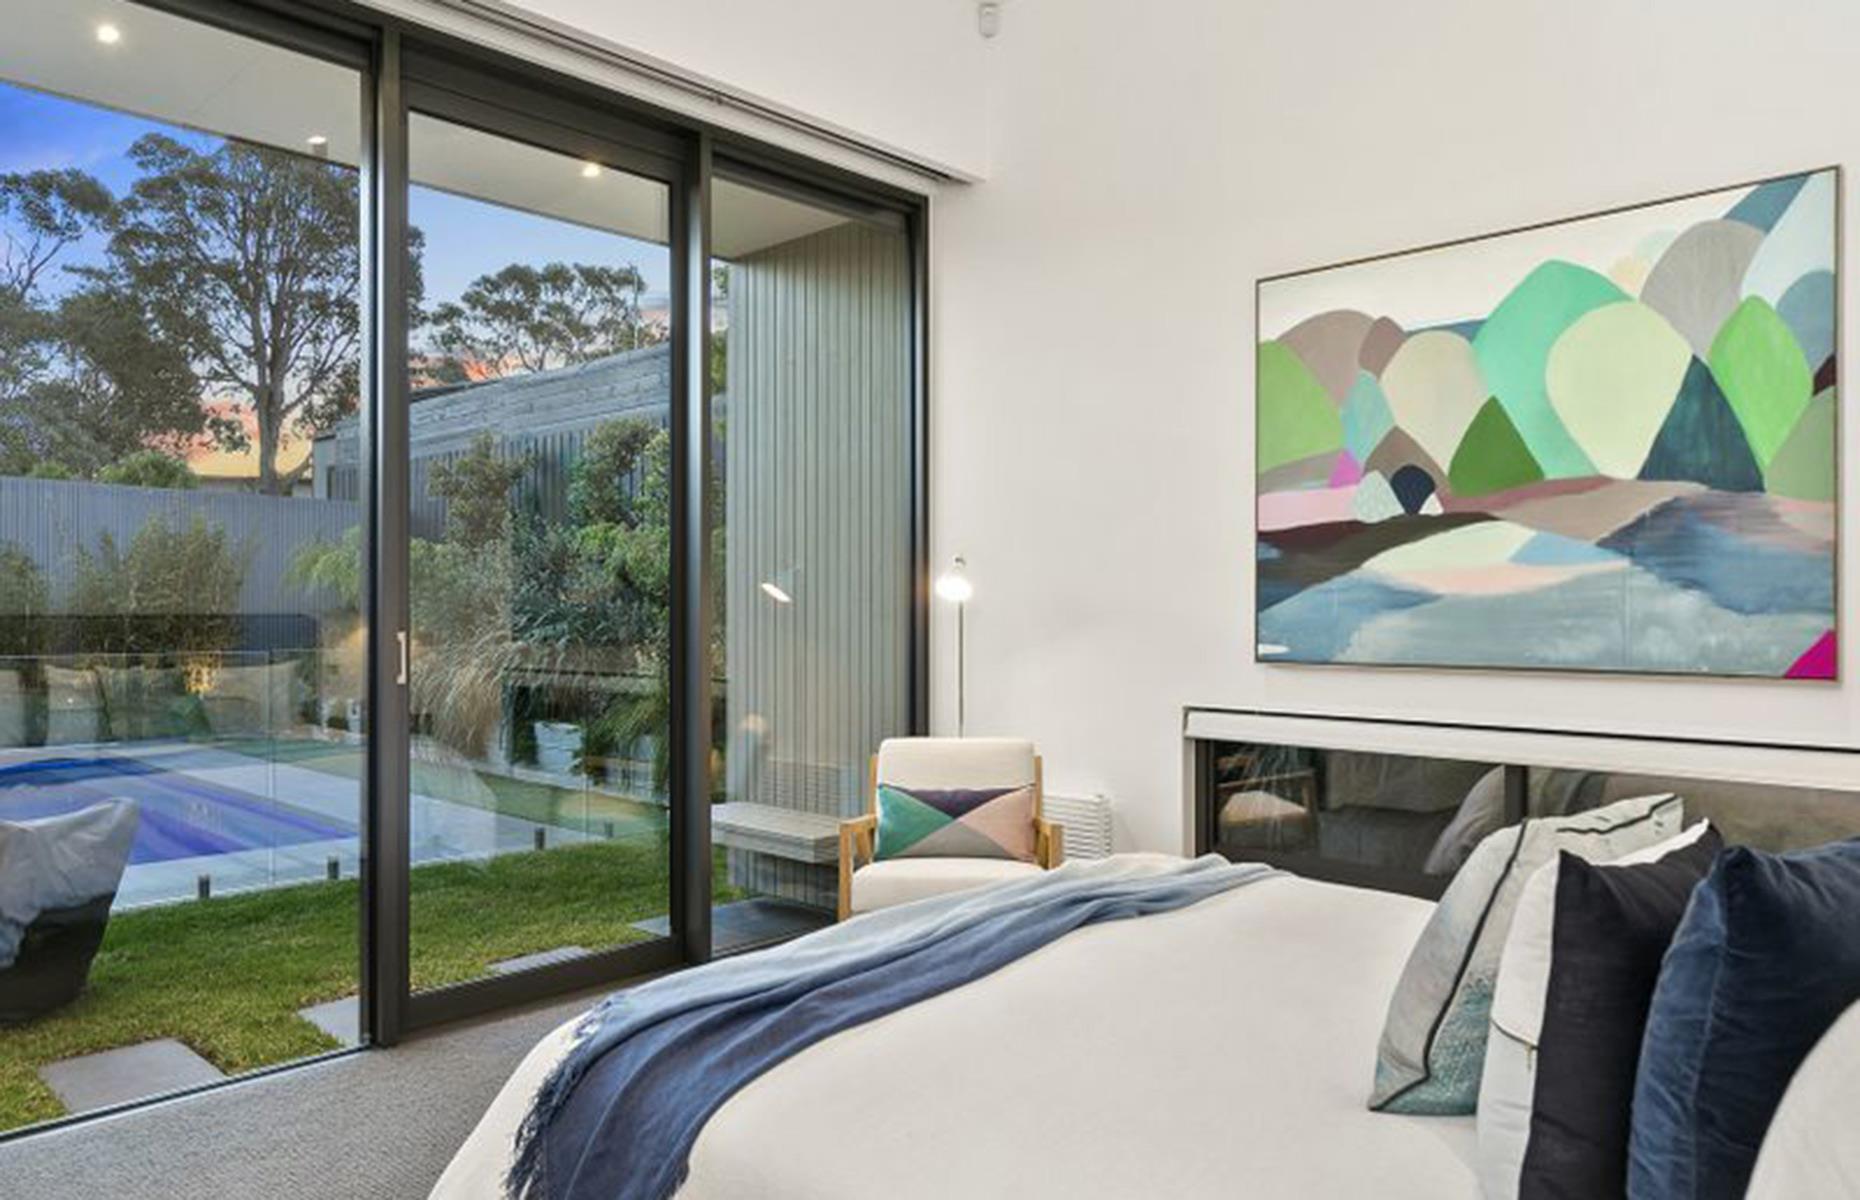 <p><a href="https://www.realestate.com.au/property/23-holmwood-ave-anglesea-vic-3230/">The property</a> was constructed using a combination of glass and concrete, resulting in a brutalist, bunker-like aesthetic. Inside, the same materials continue, complemented by light timber floors and crisp white walls. </p>